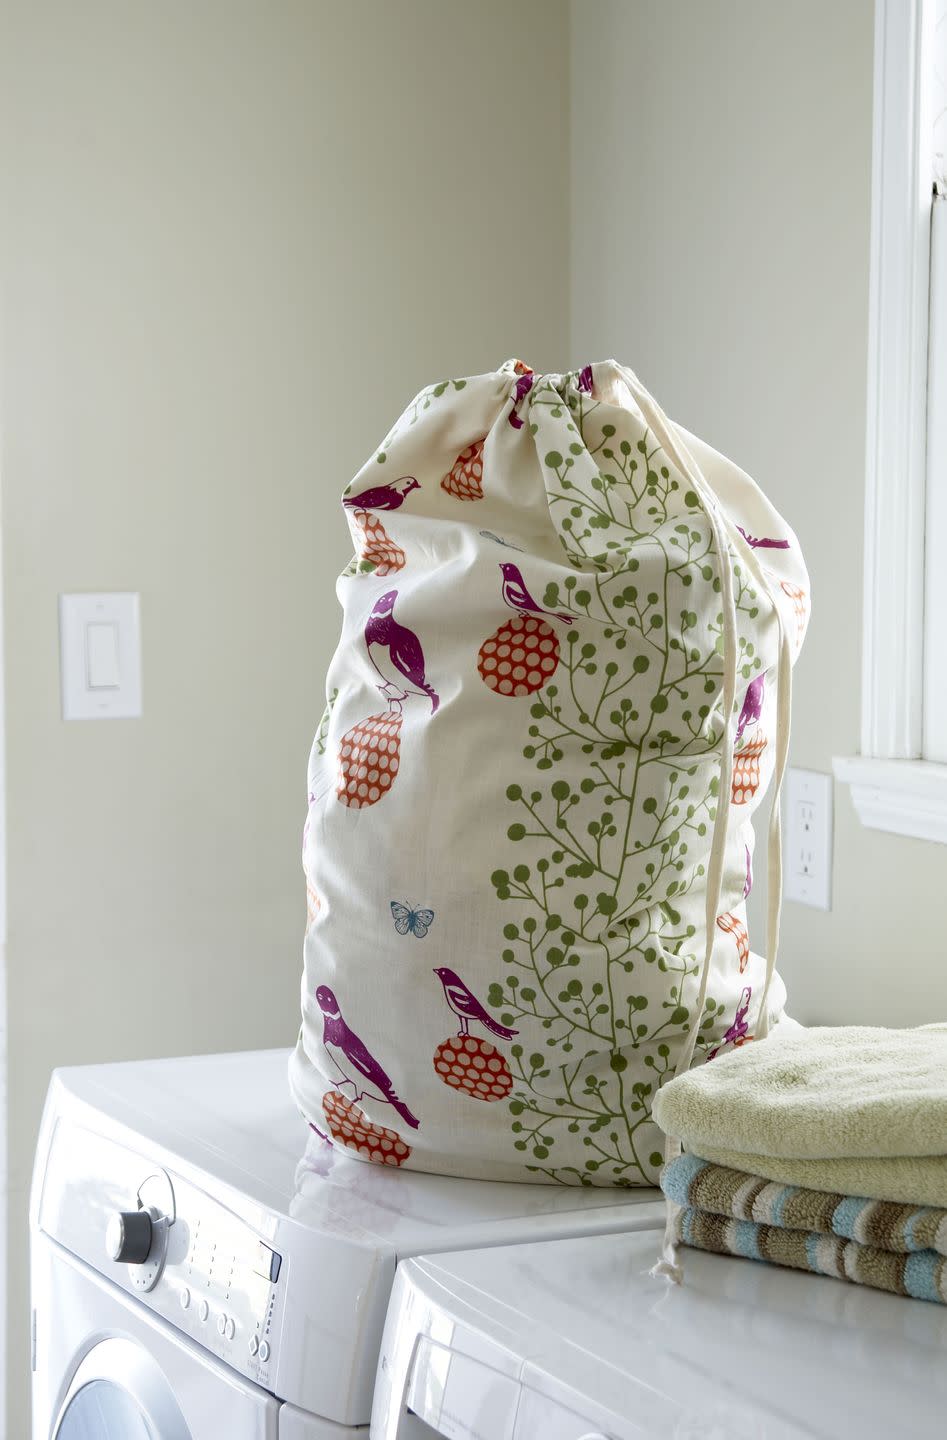 <p>Instead of a laundry bin in the bathroom, invest in a set of drawstring cotton laundry bags (buy from <a href="https://www.amazon.co.uk/s?k=drawstring+cotton+laundry+bag&ref=nb_sb_noss" rel="nofollow noopener" target="_blank" data-ylk="slk:Amazon" class="link ">Amazon</a>) to hang on the back of every bedroom door. This avoids dirty clothes piling up on the floor and is also more hygienic, as the bags can be washed too. </p>